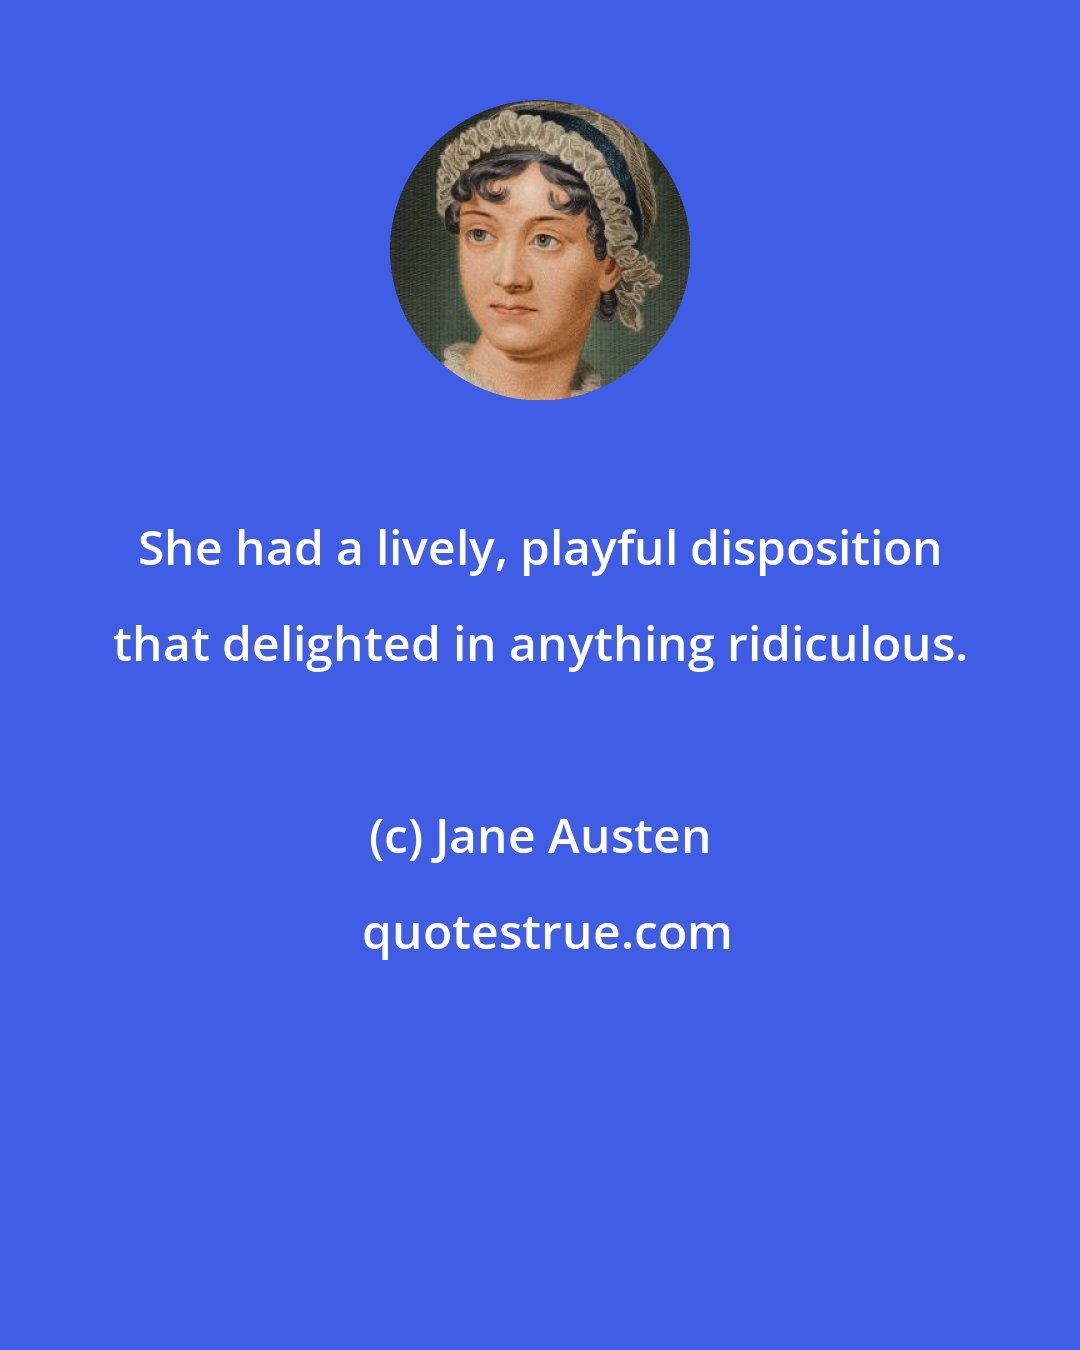 Jane Austen: She had a lively, playful disposition that delighted in anything ridiculous.